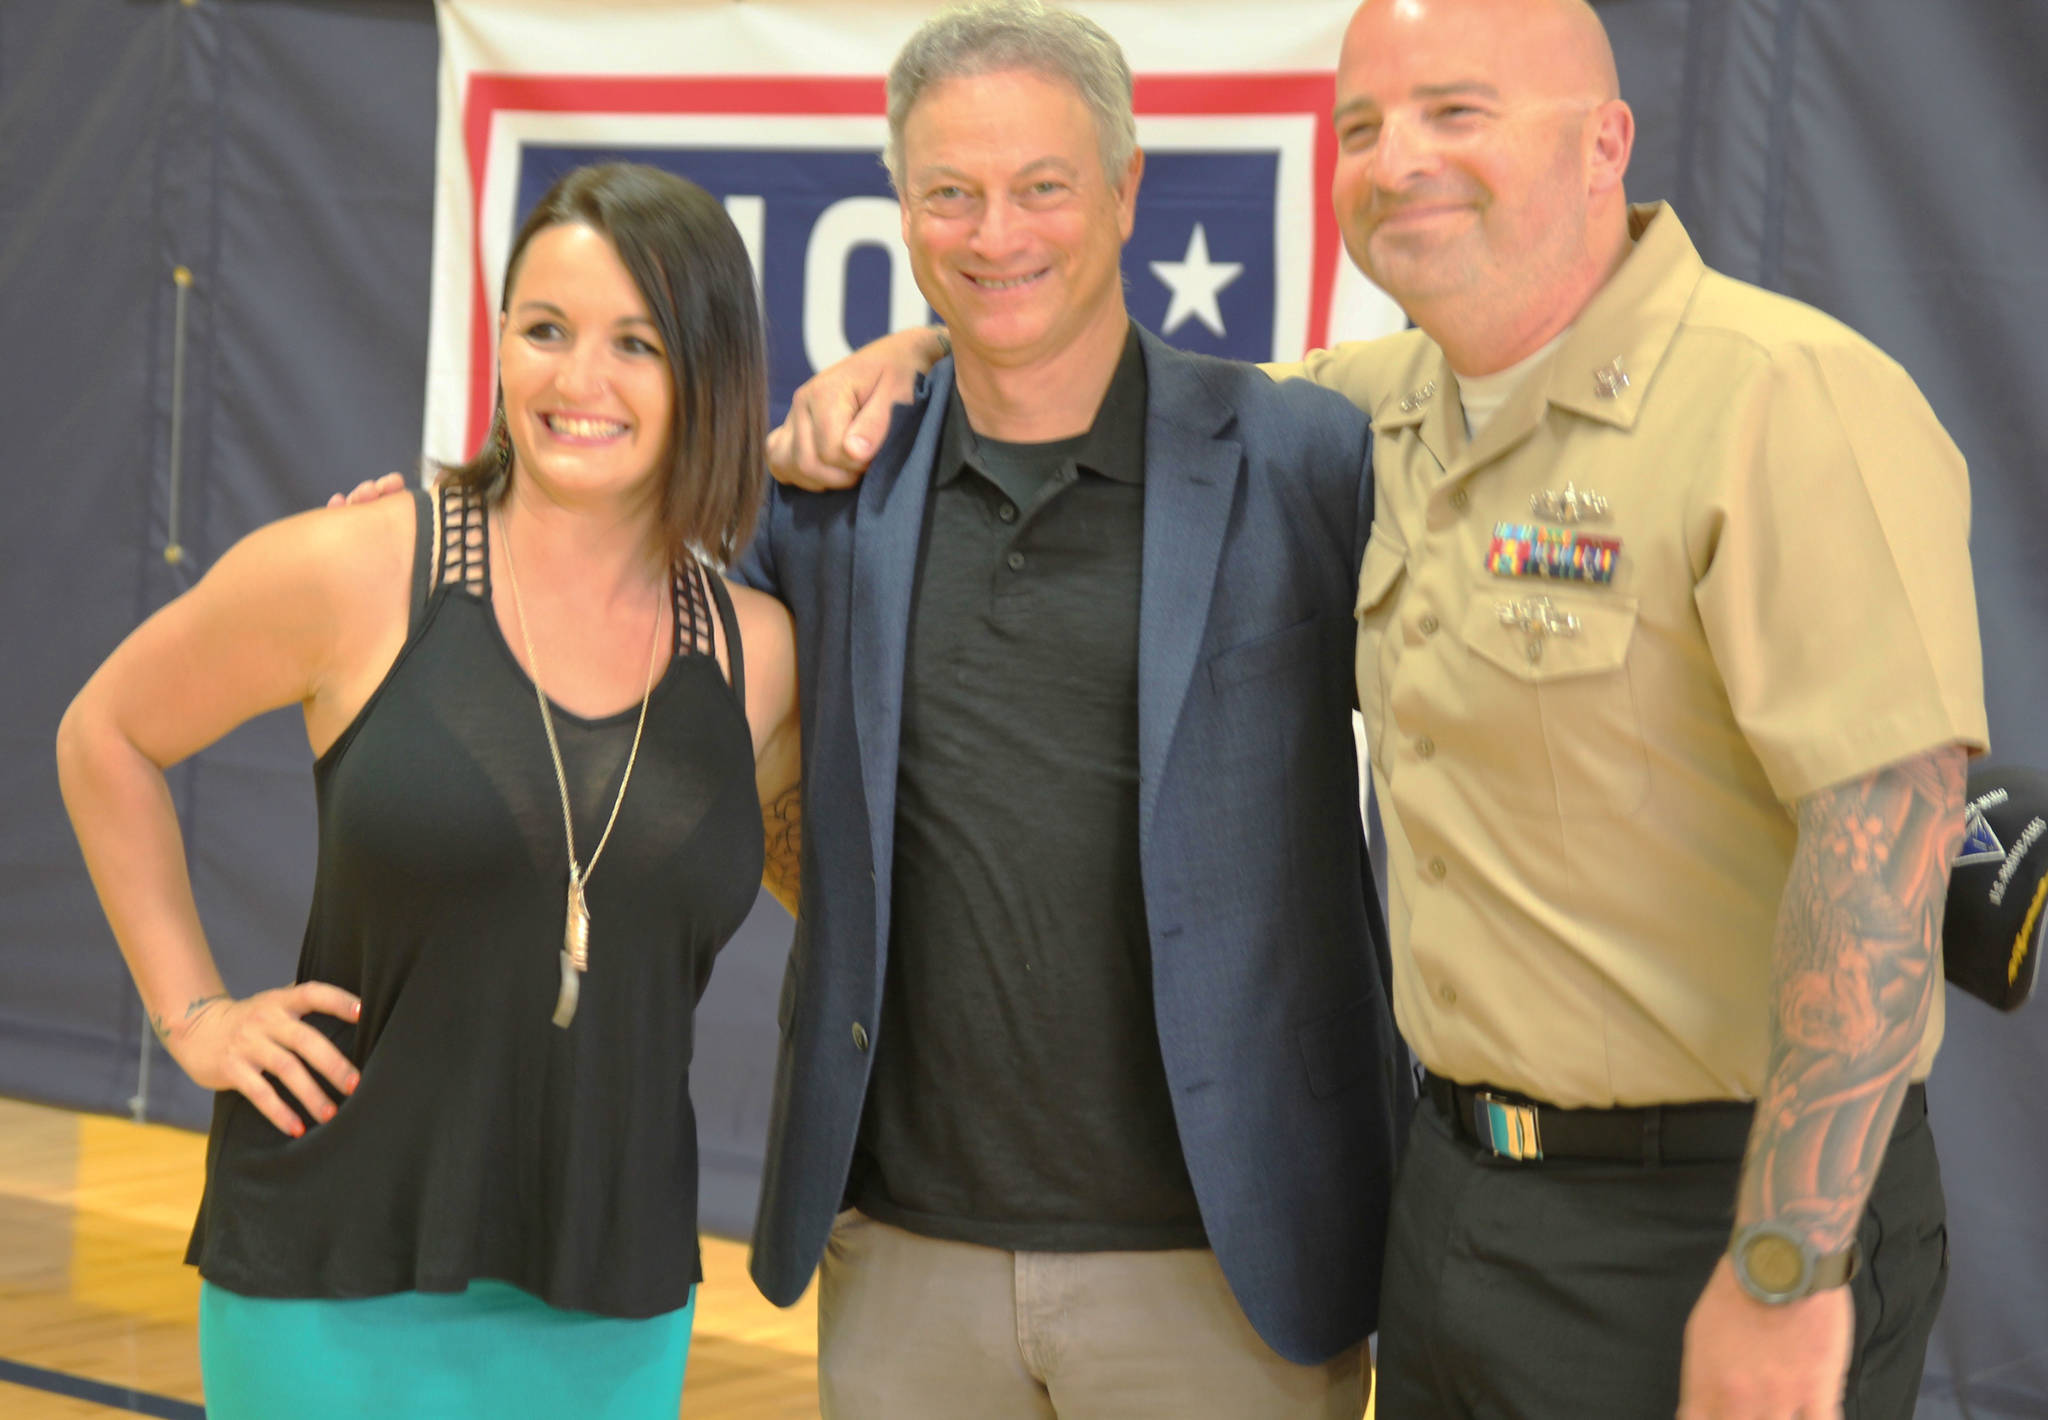 Actor, musician and humanitarian Gary Sinise poses with Tobias and Kimberly Stiewing after participating in a promotion ceremony at Naval Air Station Whidbey Island. Stiewing asked to be “pinned” by Sinise before he performed with the Lt. Dan Band at an outdoor base concert sponsored by USO and Gary Sinise Foundation. Photo by Patricia Guthrie/Whidbey News Times